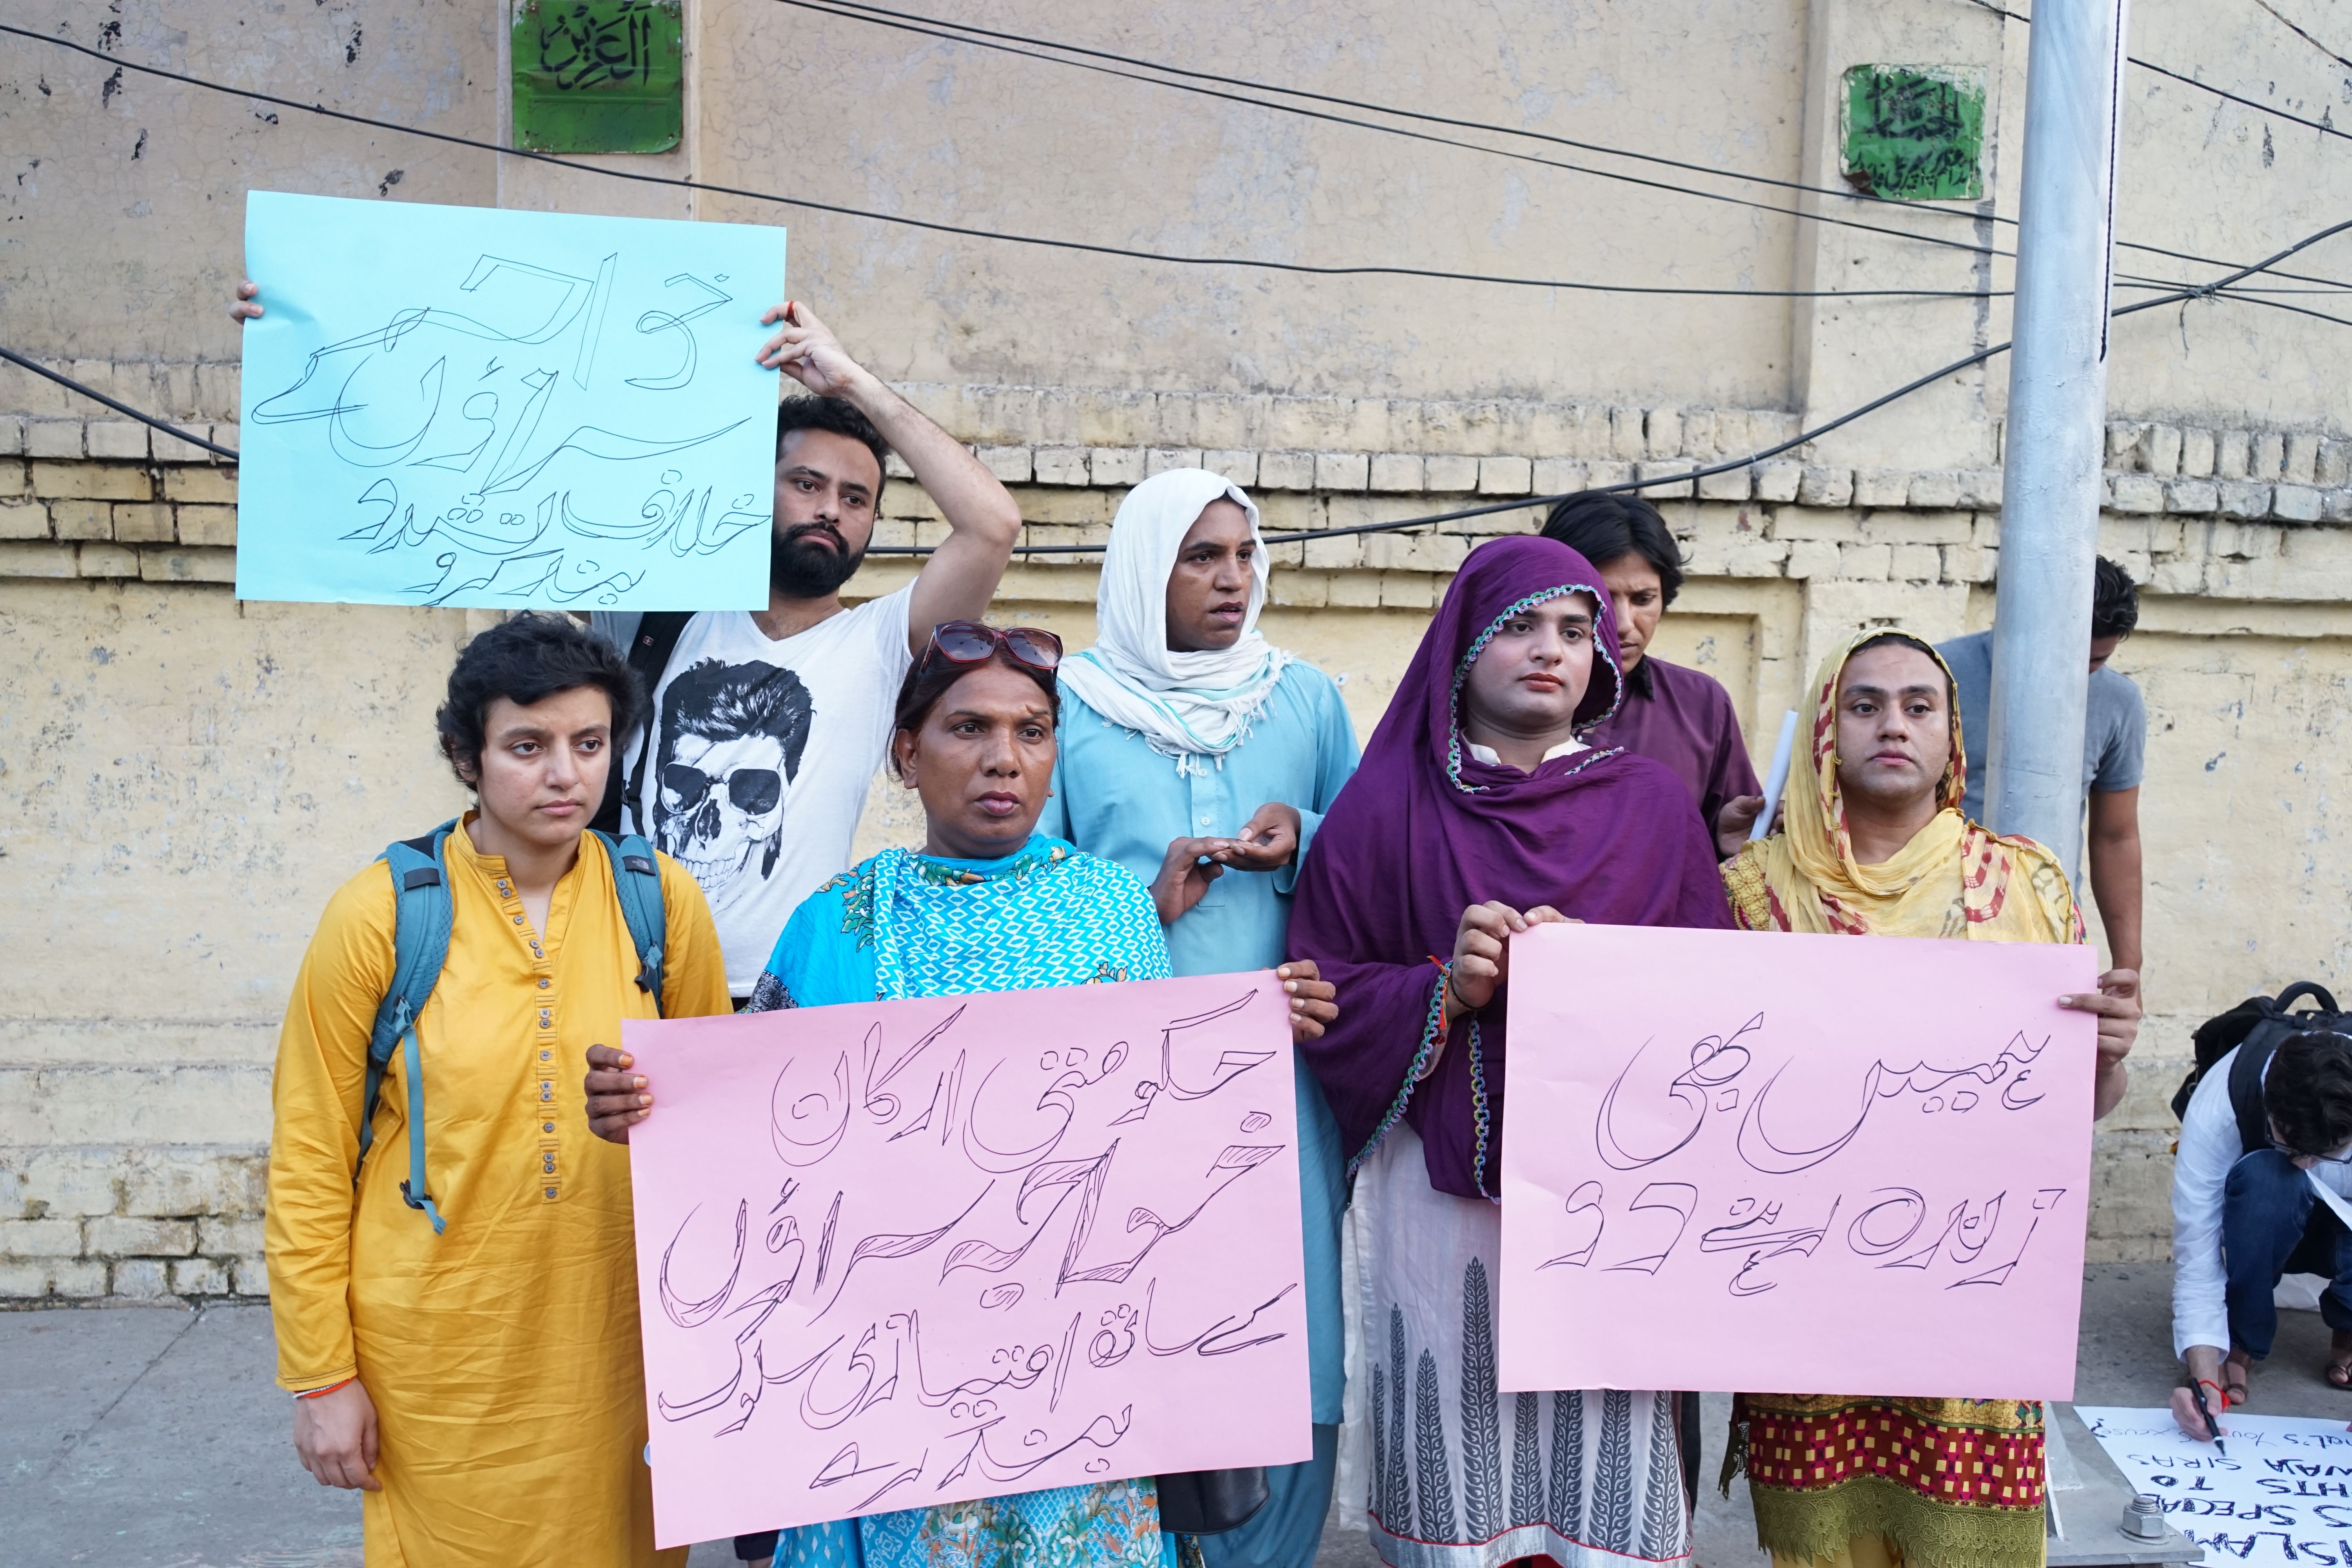 A group of protesters stand with signs on the sidewalk of a busy street. It is near evening in early August. The blue sign reads, "Stop the violence against khawaja siras." (The other two signs are the same from the previous picture). Image by Ikra Javed. Pakistan, 2016.